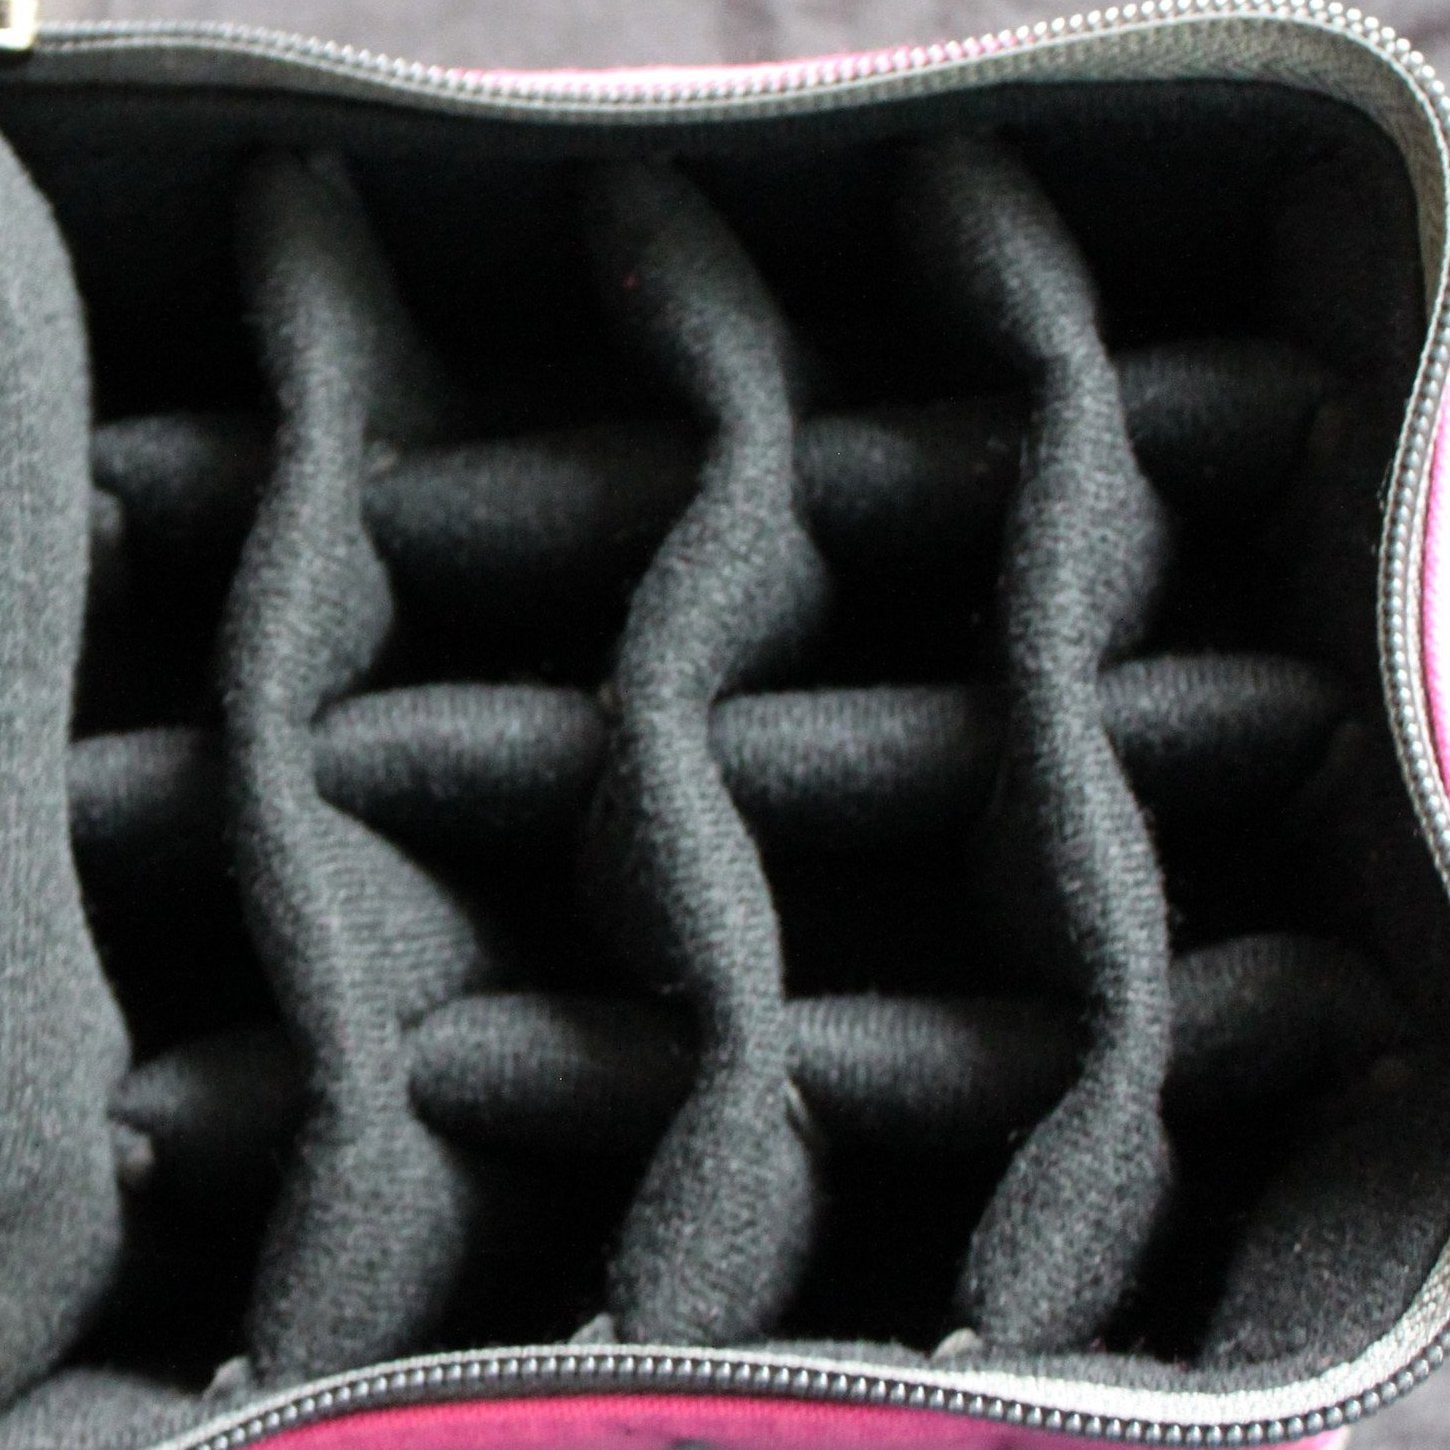 Medium Durable Hot Pink Essential Oil Carrying Case